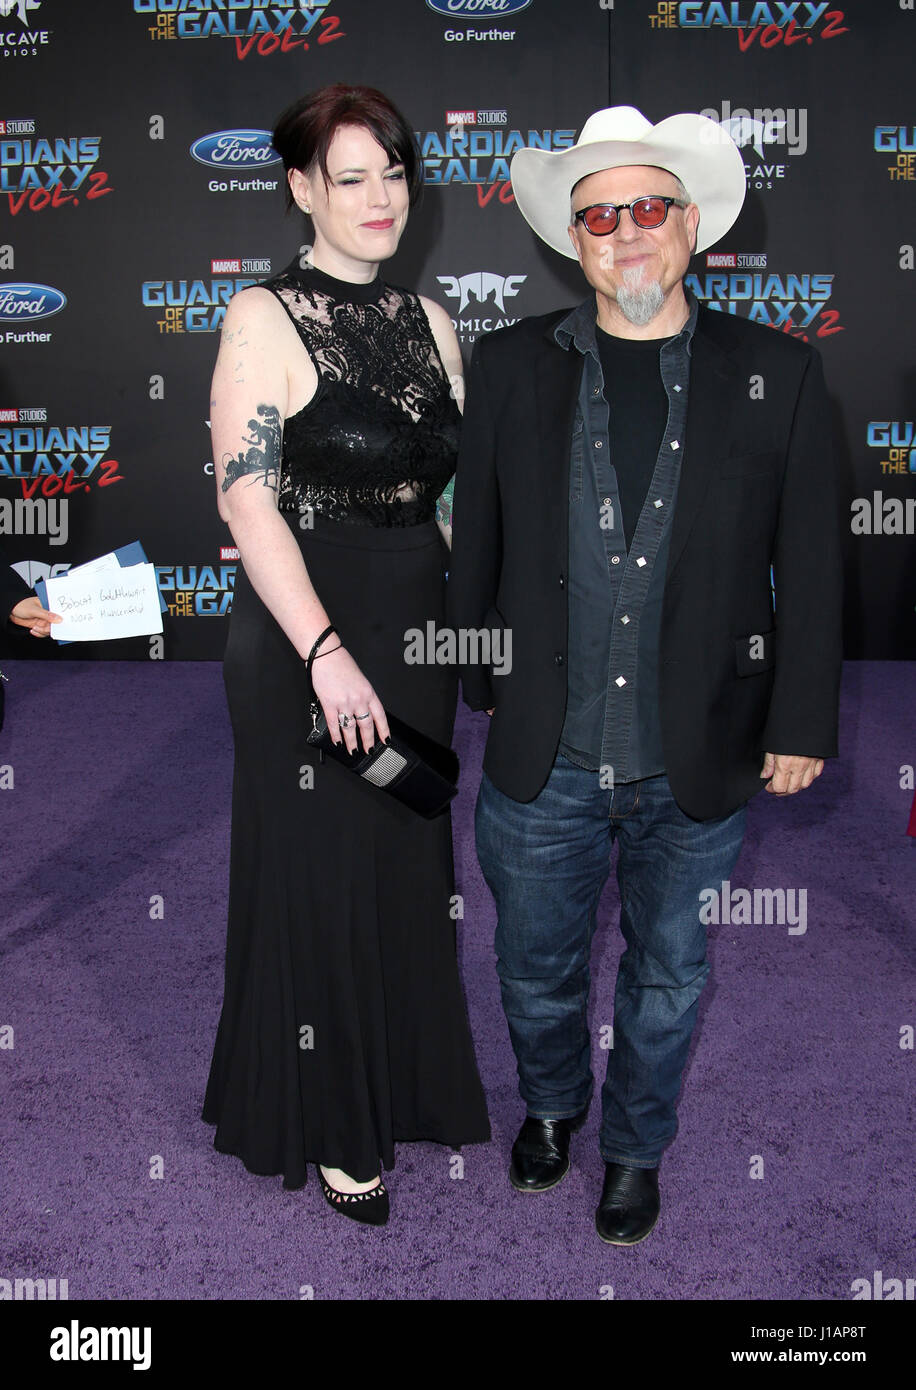 Hollywood, Ca. 19th Apr, 2017. Bobcat Goldthwait, At Premiere Of Disney And Marvel's 'Guardians Of The Galaxy Vol. 2' At The Dolby Theatre In California on April 19, 2017. Credit: Fs/Media Punch/Alamy Live News Stock Photo